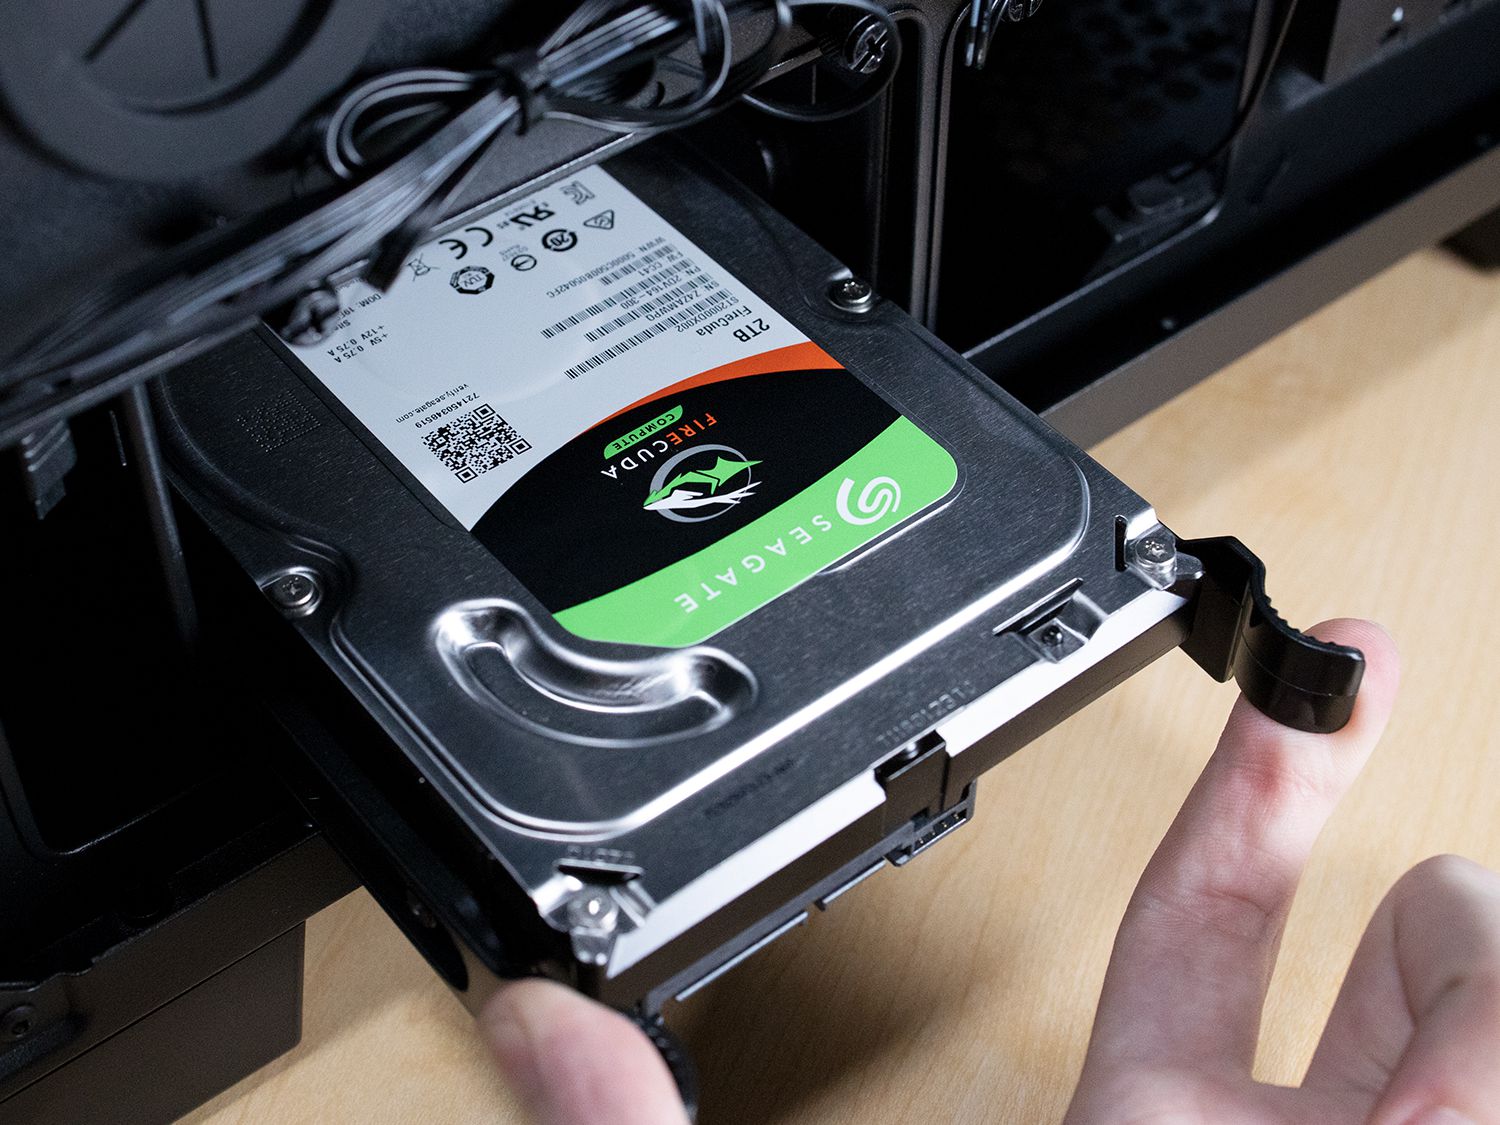 How To Use Second Hard Drive For Media Storage